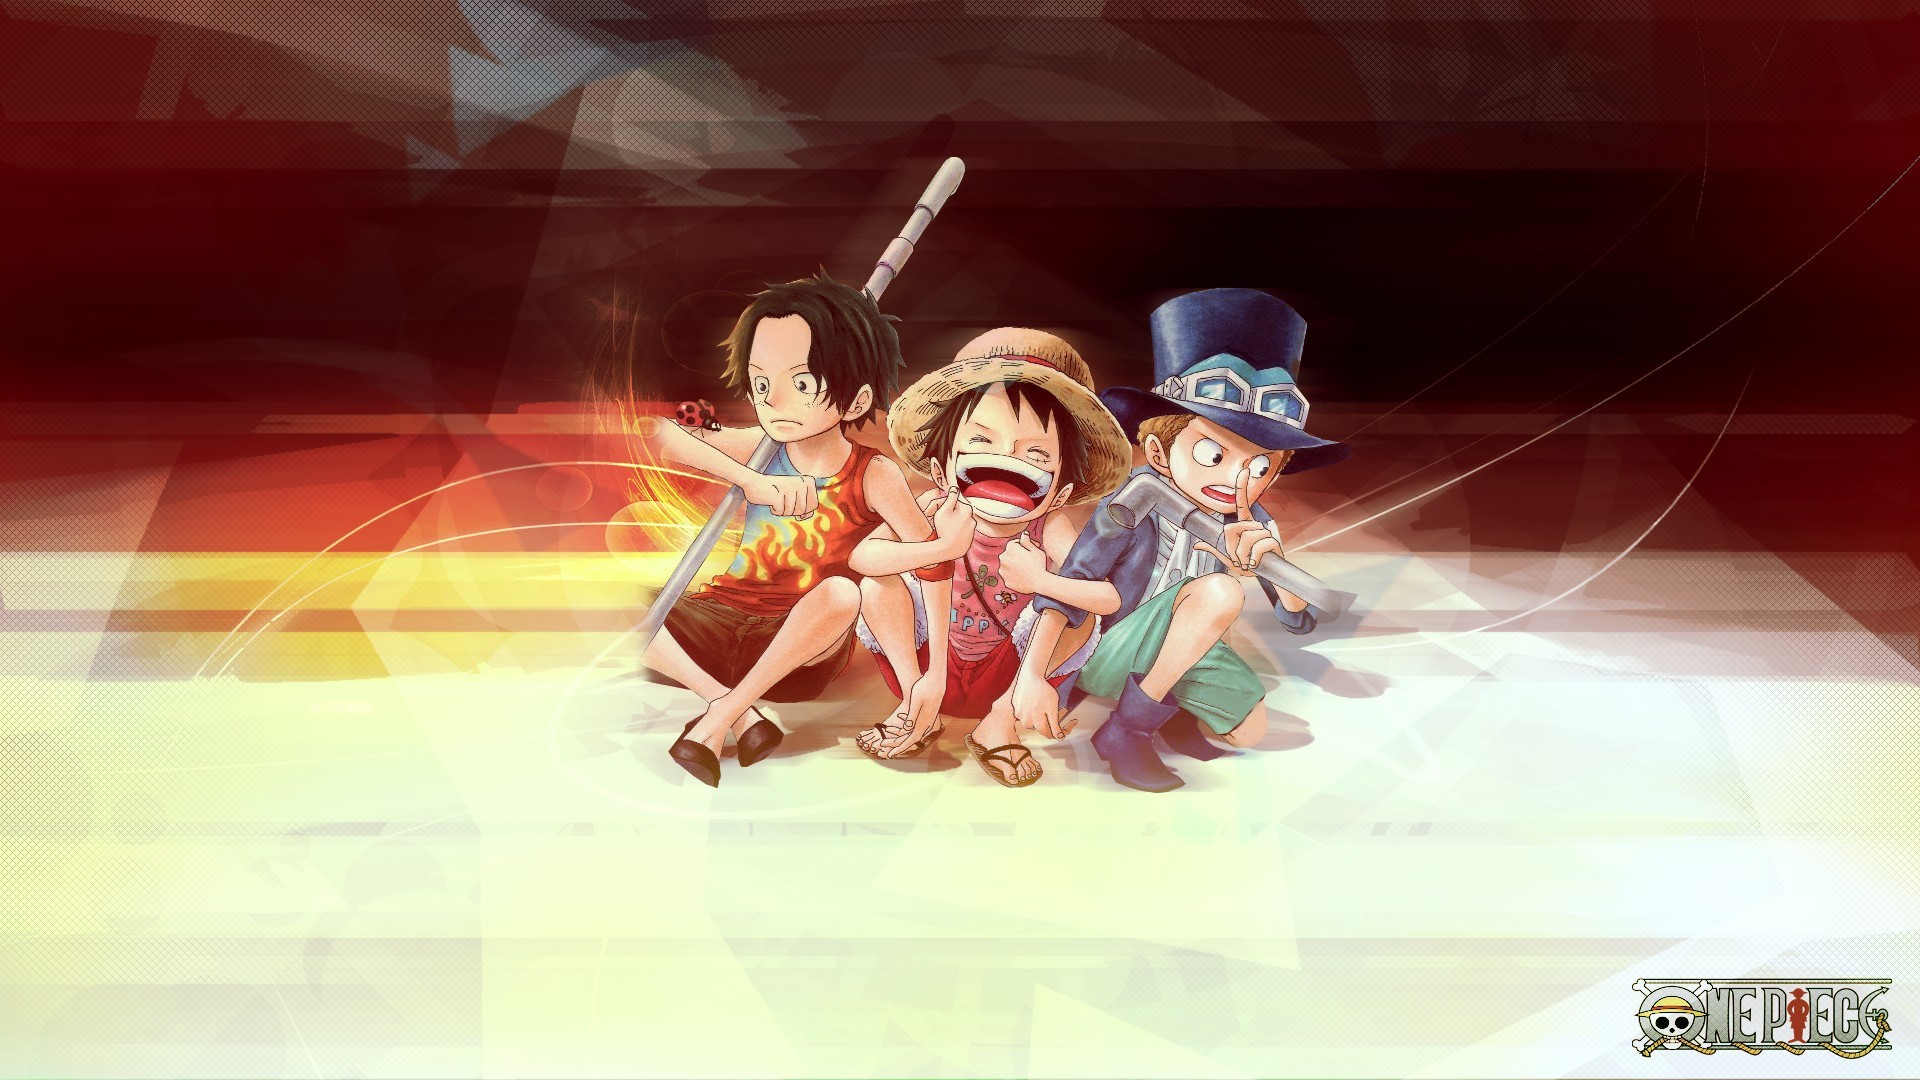 Ace Sabo And Luffy On One Piece Anime Wallpaper 1920x1080